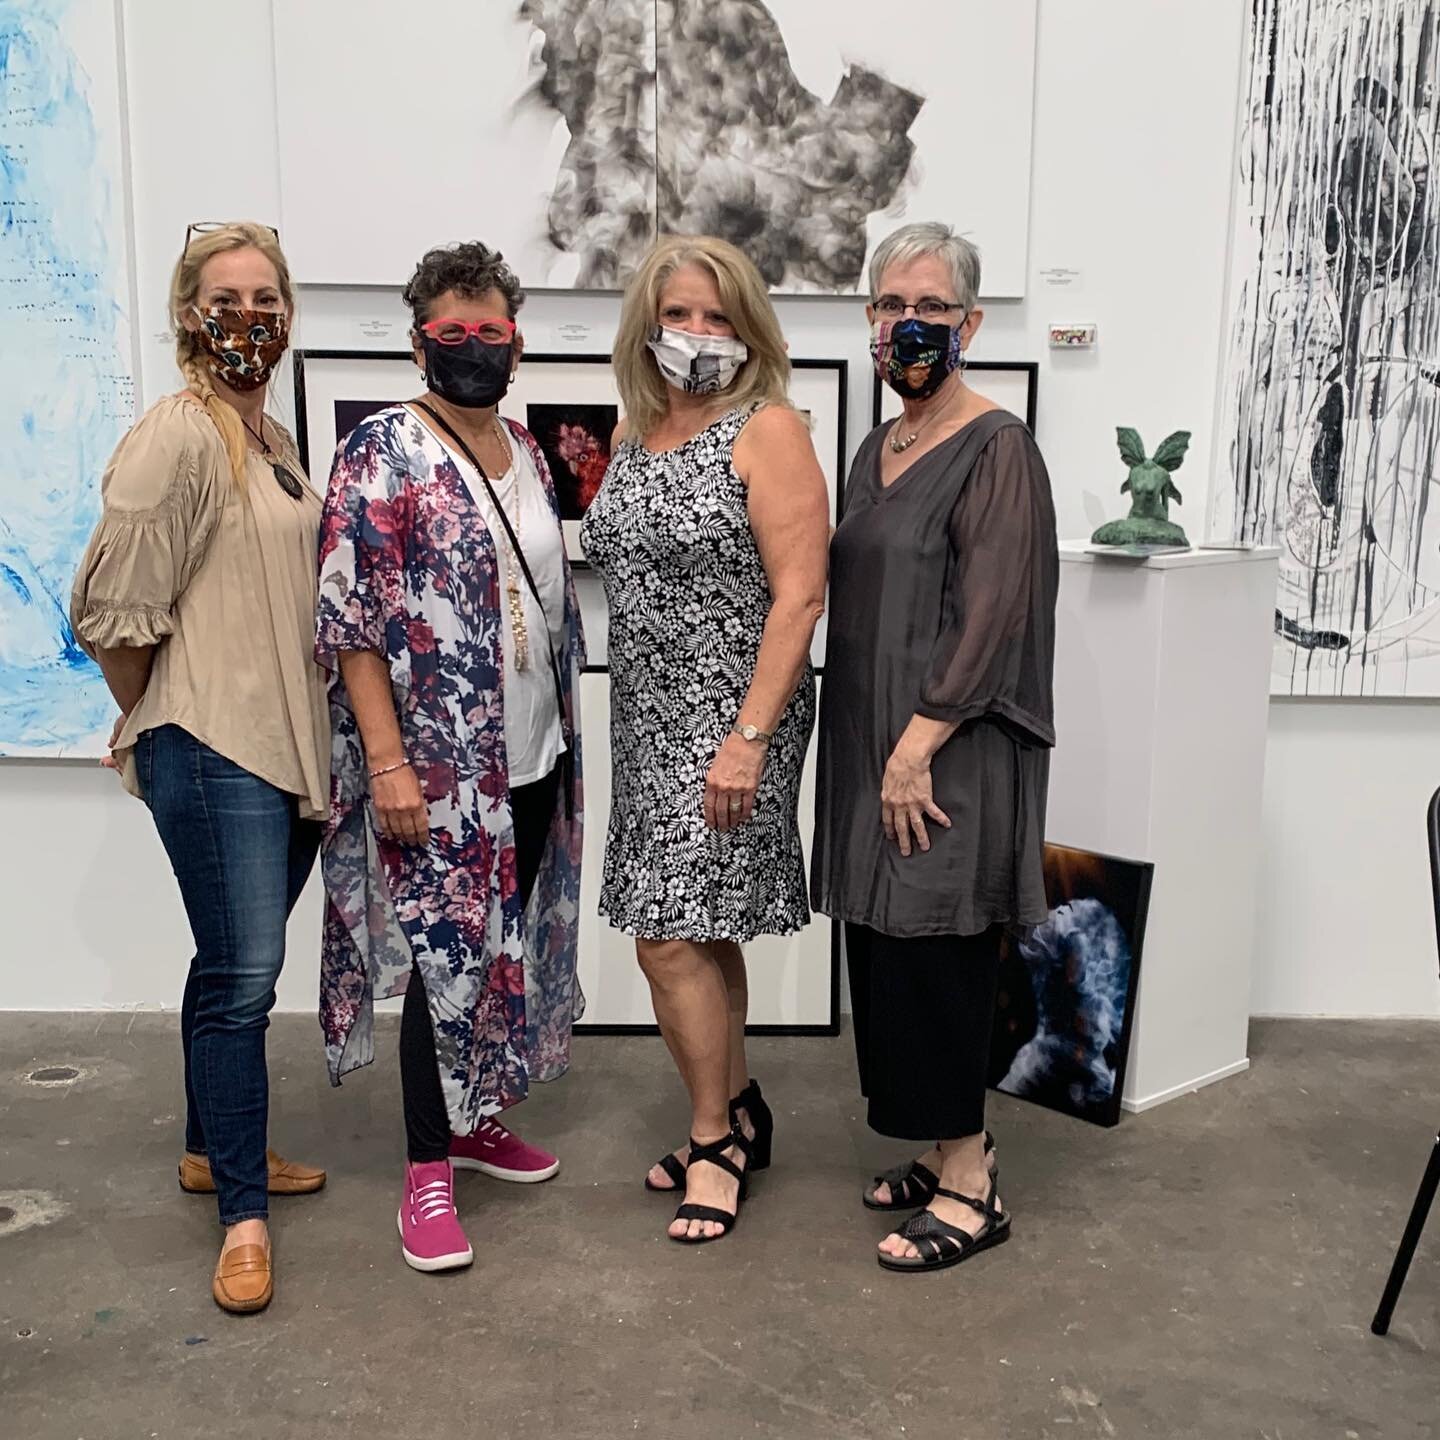 Special thanks to Art Nexus exhibiting artists for holding down the fort this weekend for 2nd Saturday Open Studios! Here are some pics of the latest exhibit. Stop by studio 223 #theartnexus #houstonartscene #sawyeryards #thesilosatsawyeryards